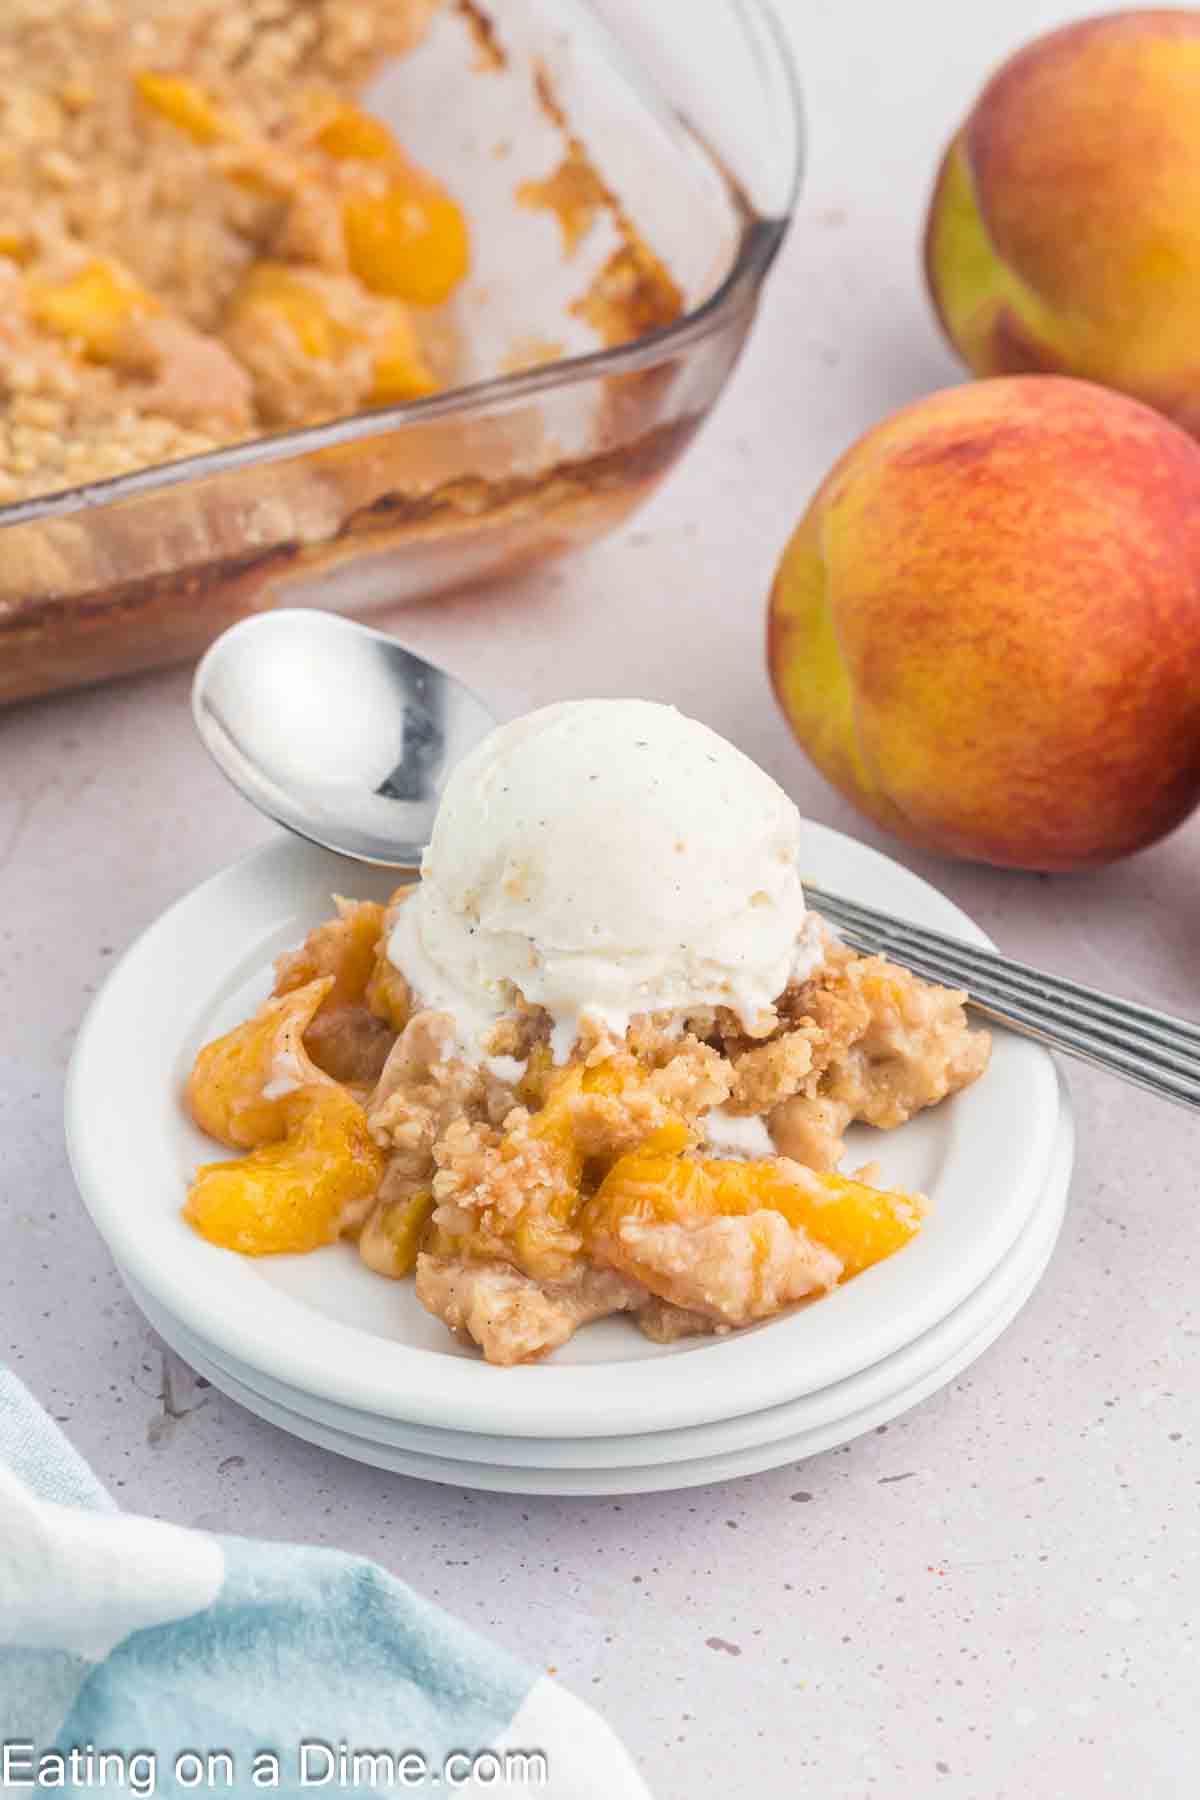 Peach crumble on a place with a scoop of ice cream